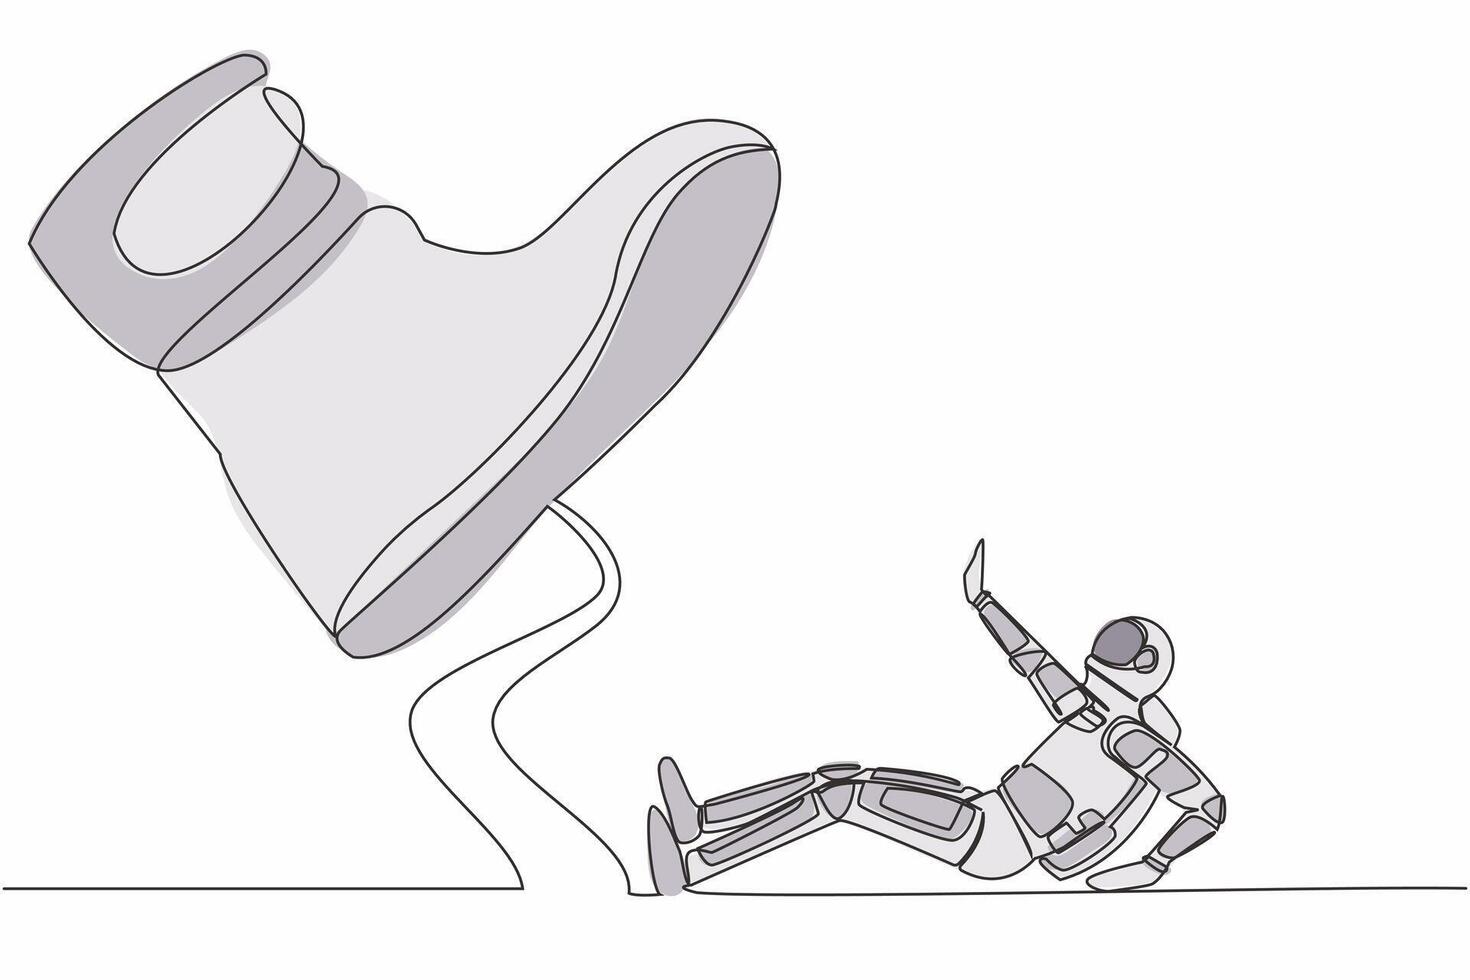 Single continuous line drawing of young astronaut under giant foot in moon surface. Big boss foot in shoe going to crush science. Cosmonaut deep space. One line draw design vector graphic illustration